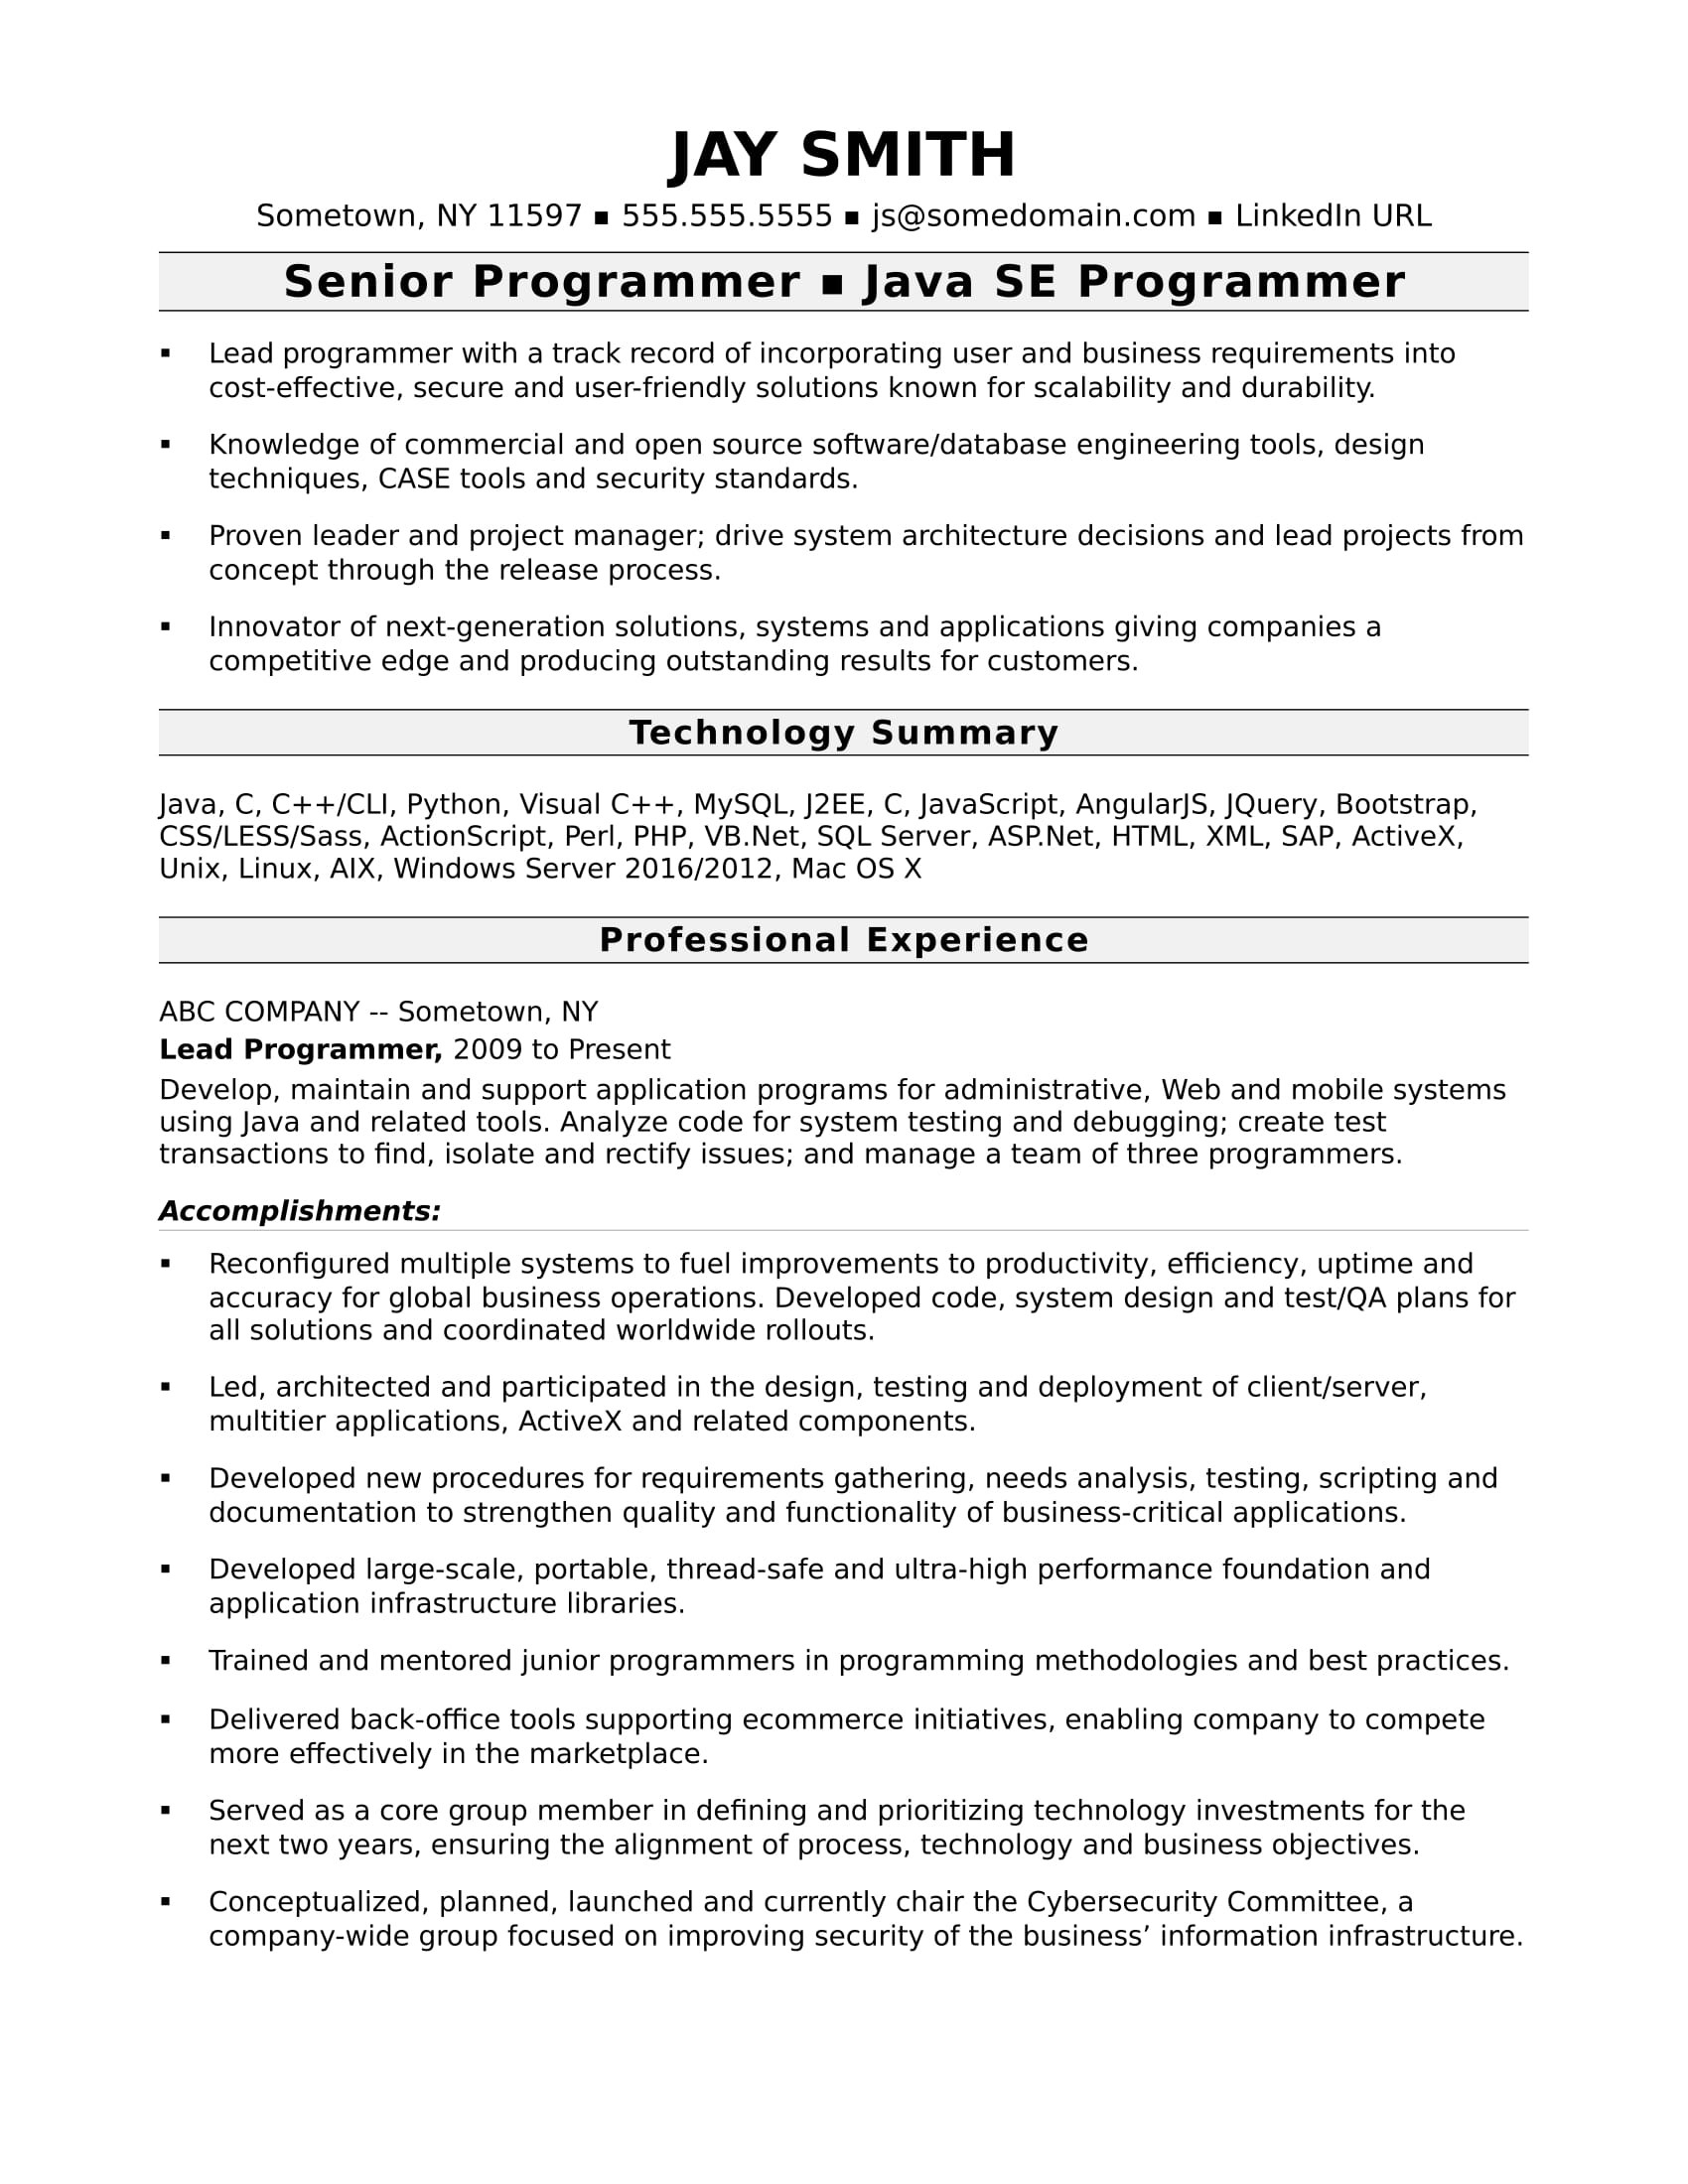 Resume Template for Lots Of Experience Programmer Resume Template Monster.com